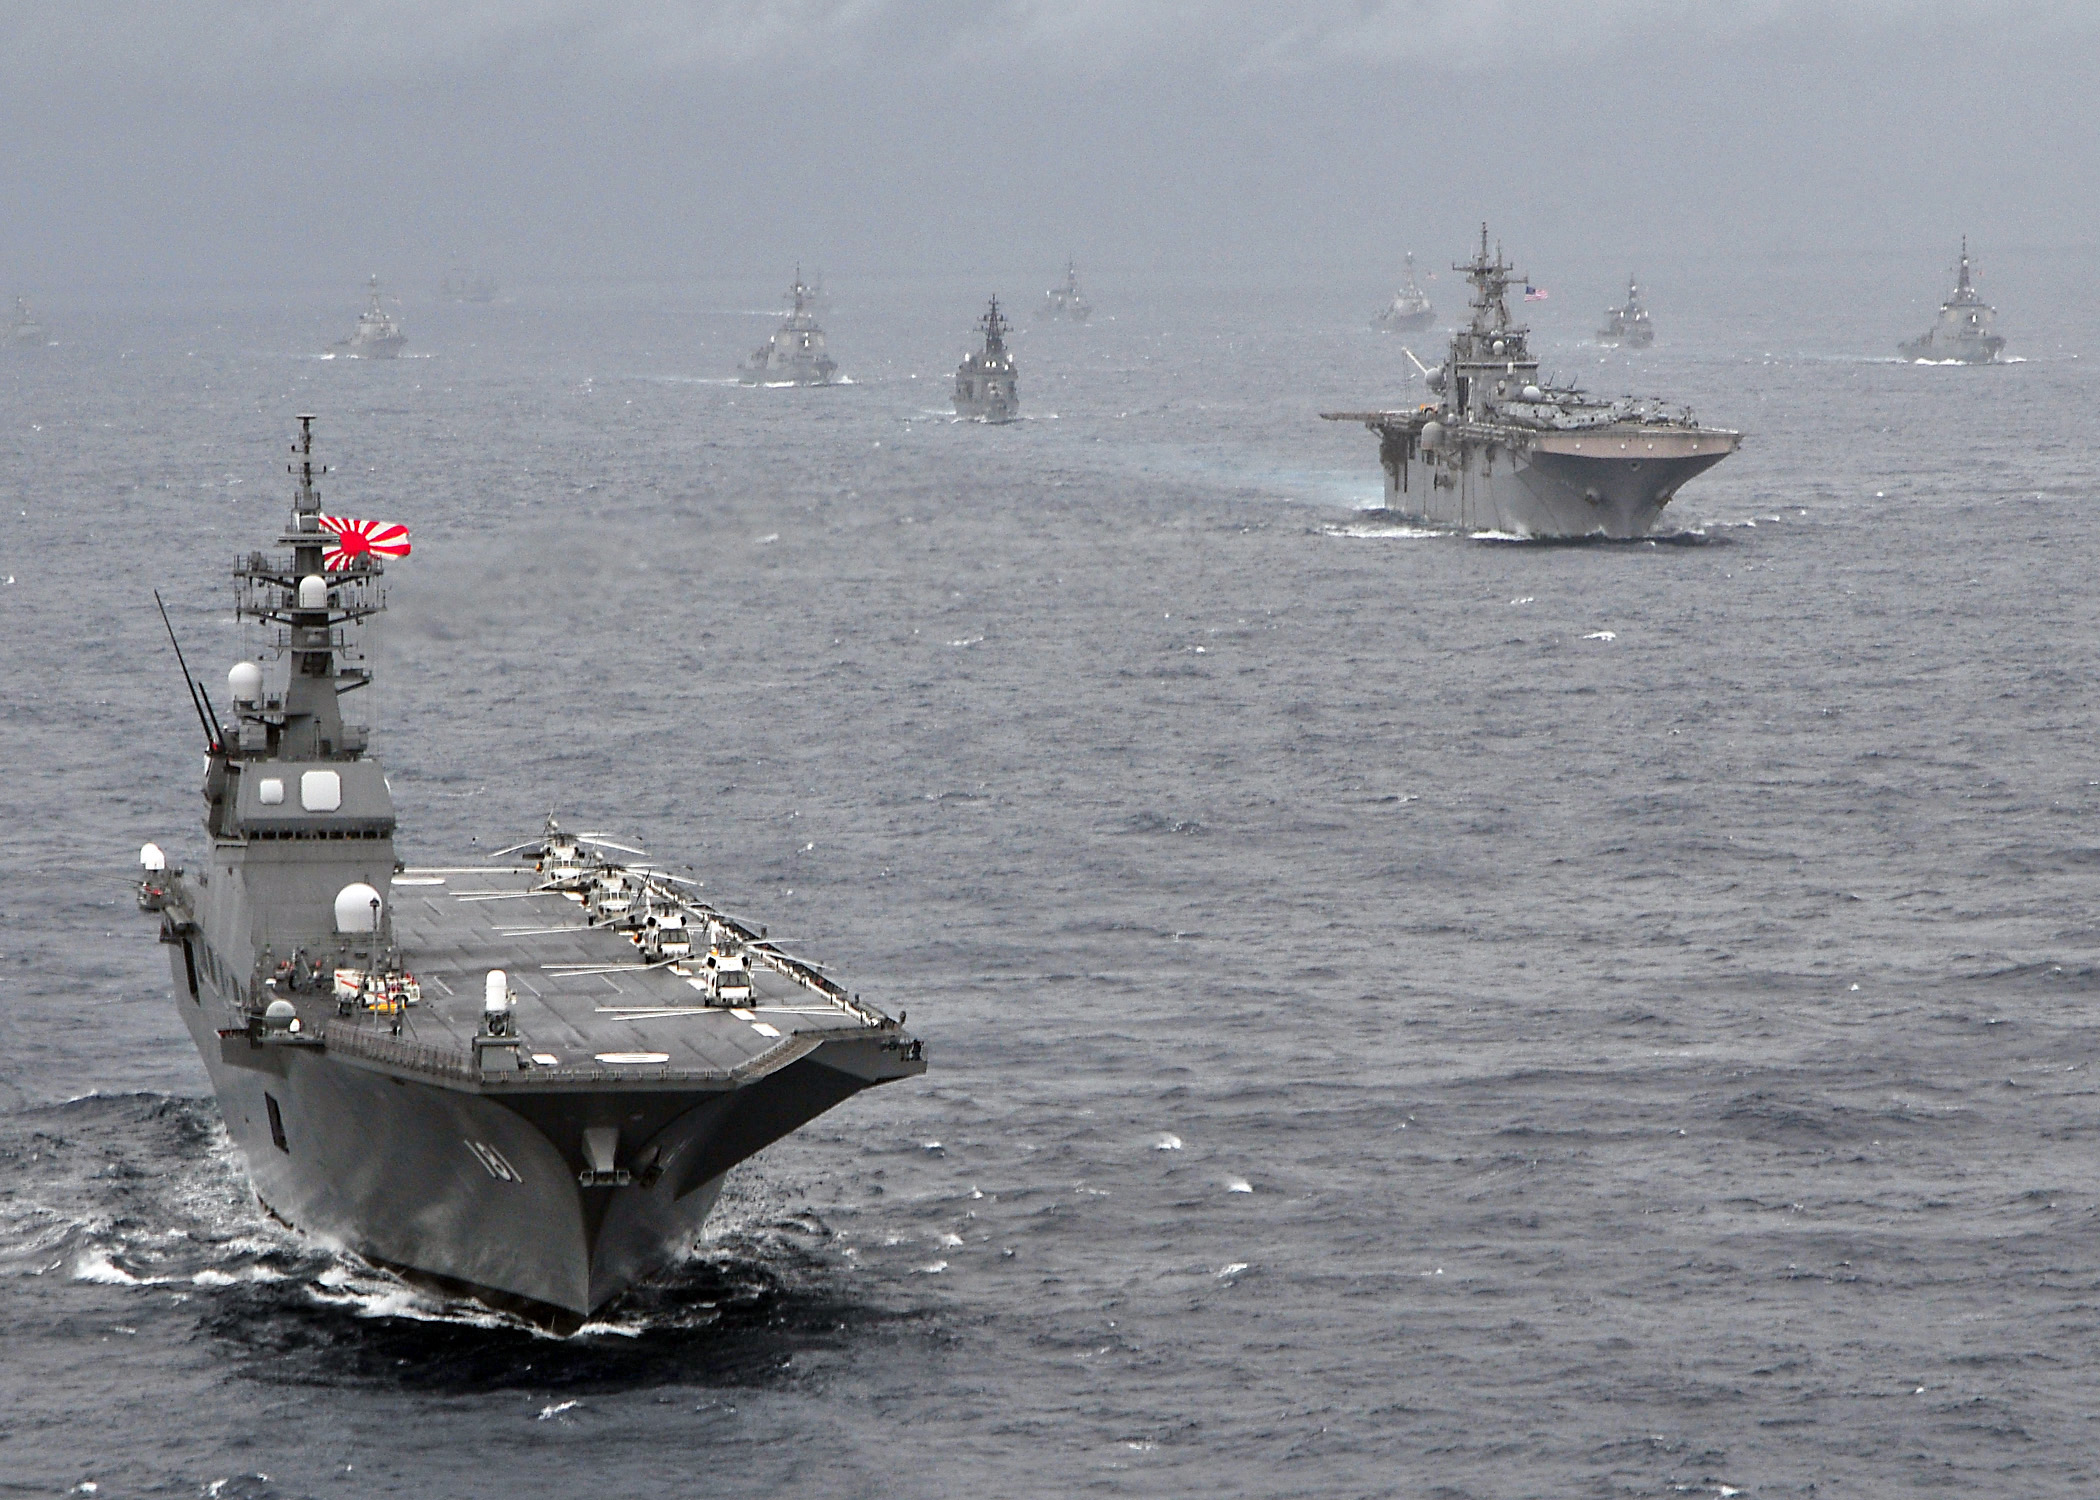 Japan Maritime Self-Defense Force helicopter destroyer JS Hyuga (DDH-181) leads a formation of US Navy and Japan Maritime Self-Defense Force ships in 2009. US Navy Photo